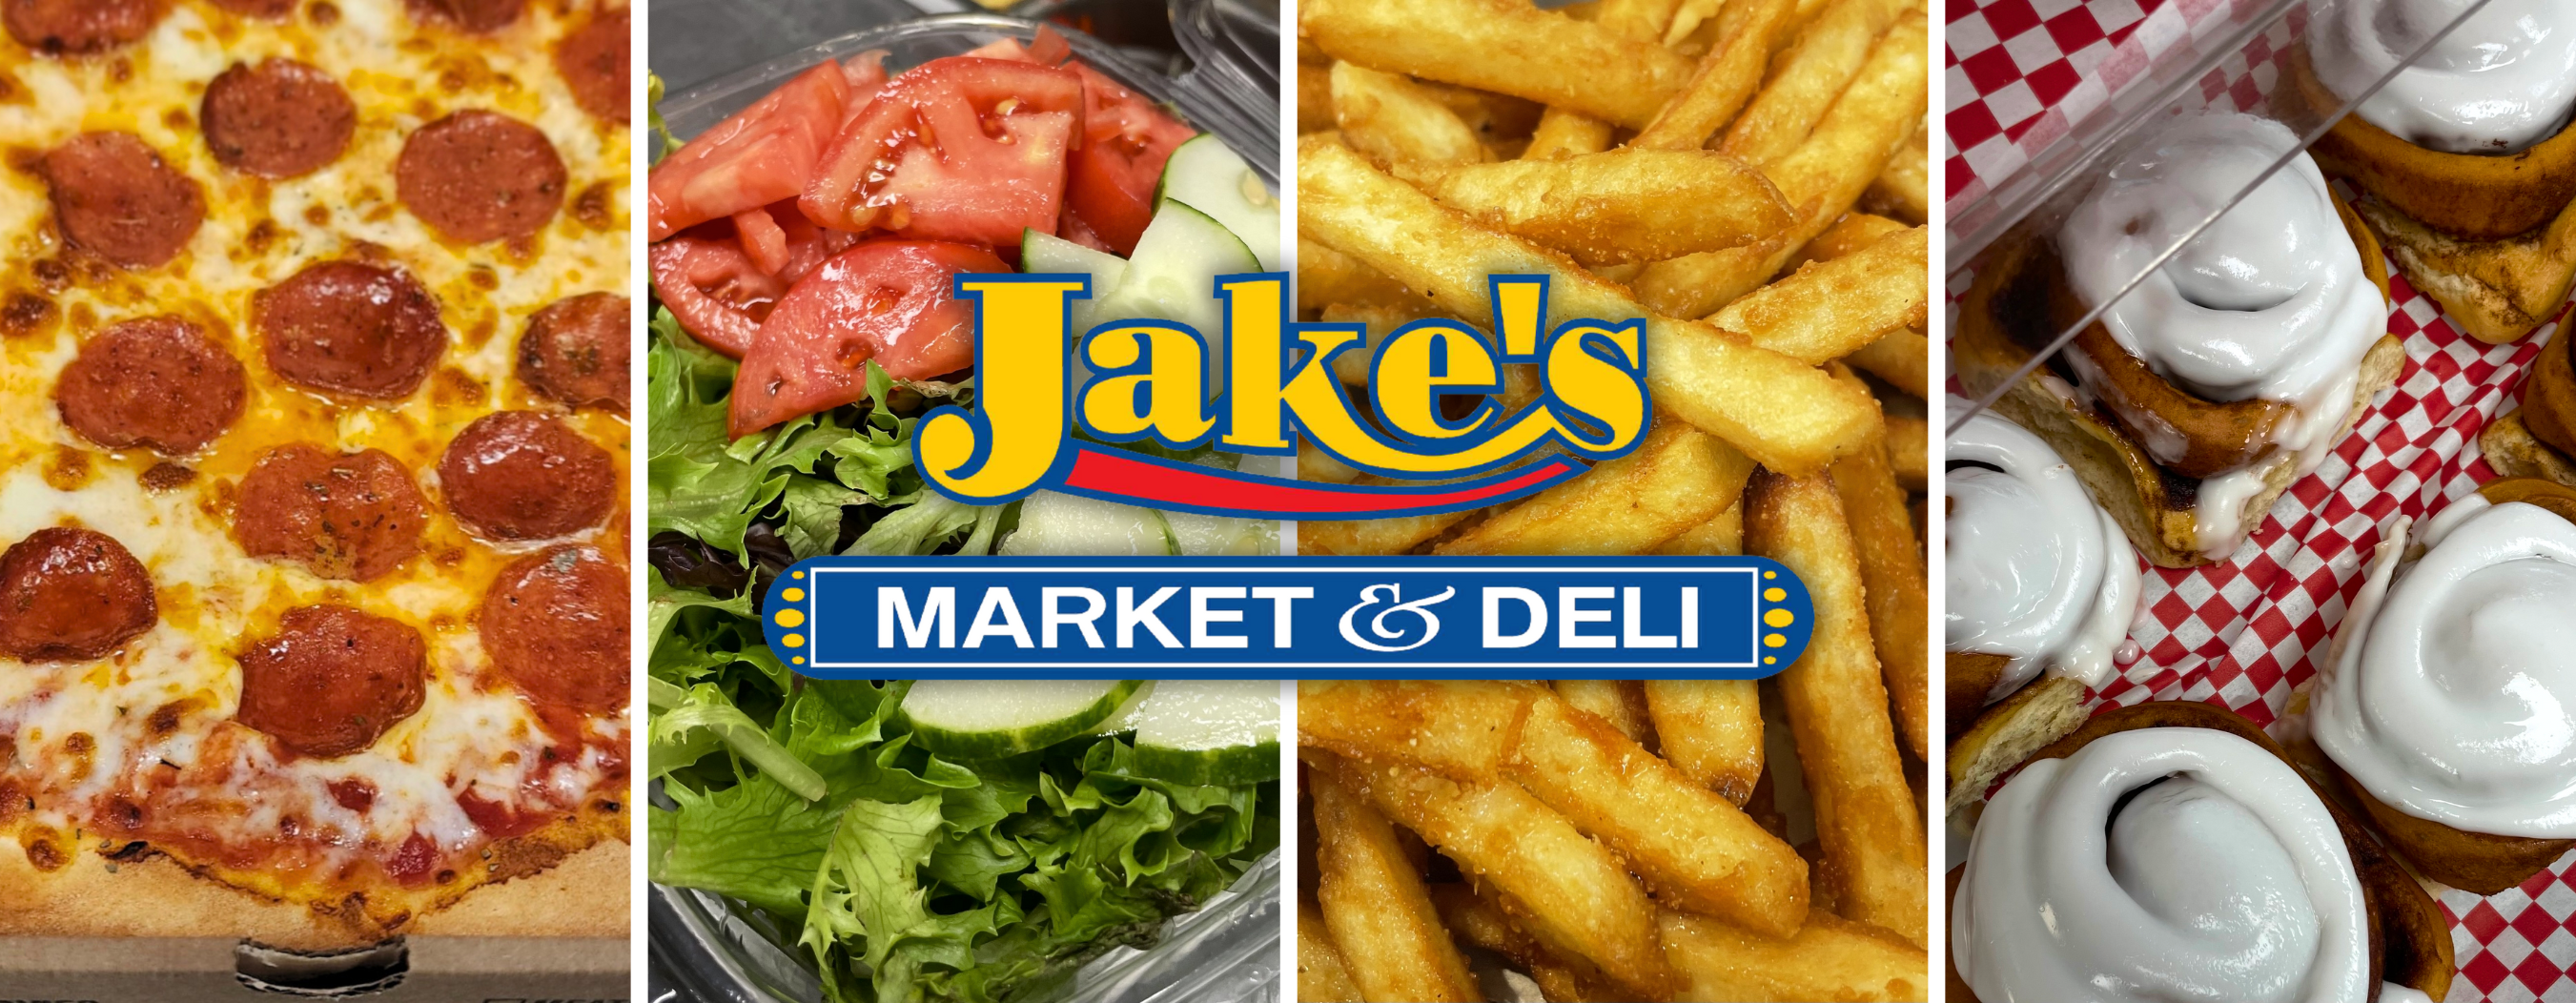 Jake's Market & Deli – pizza, fries, salads, beverages. Gas station convenience store offering food and fuel near you